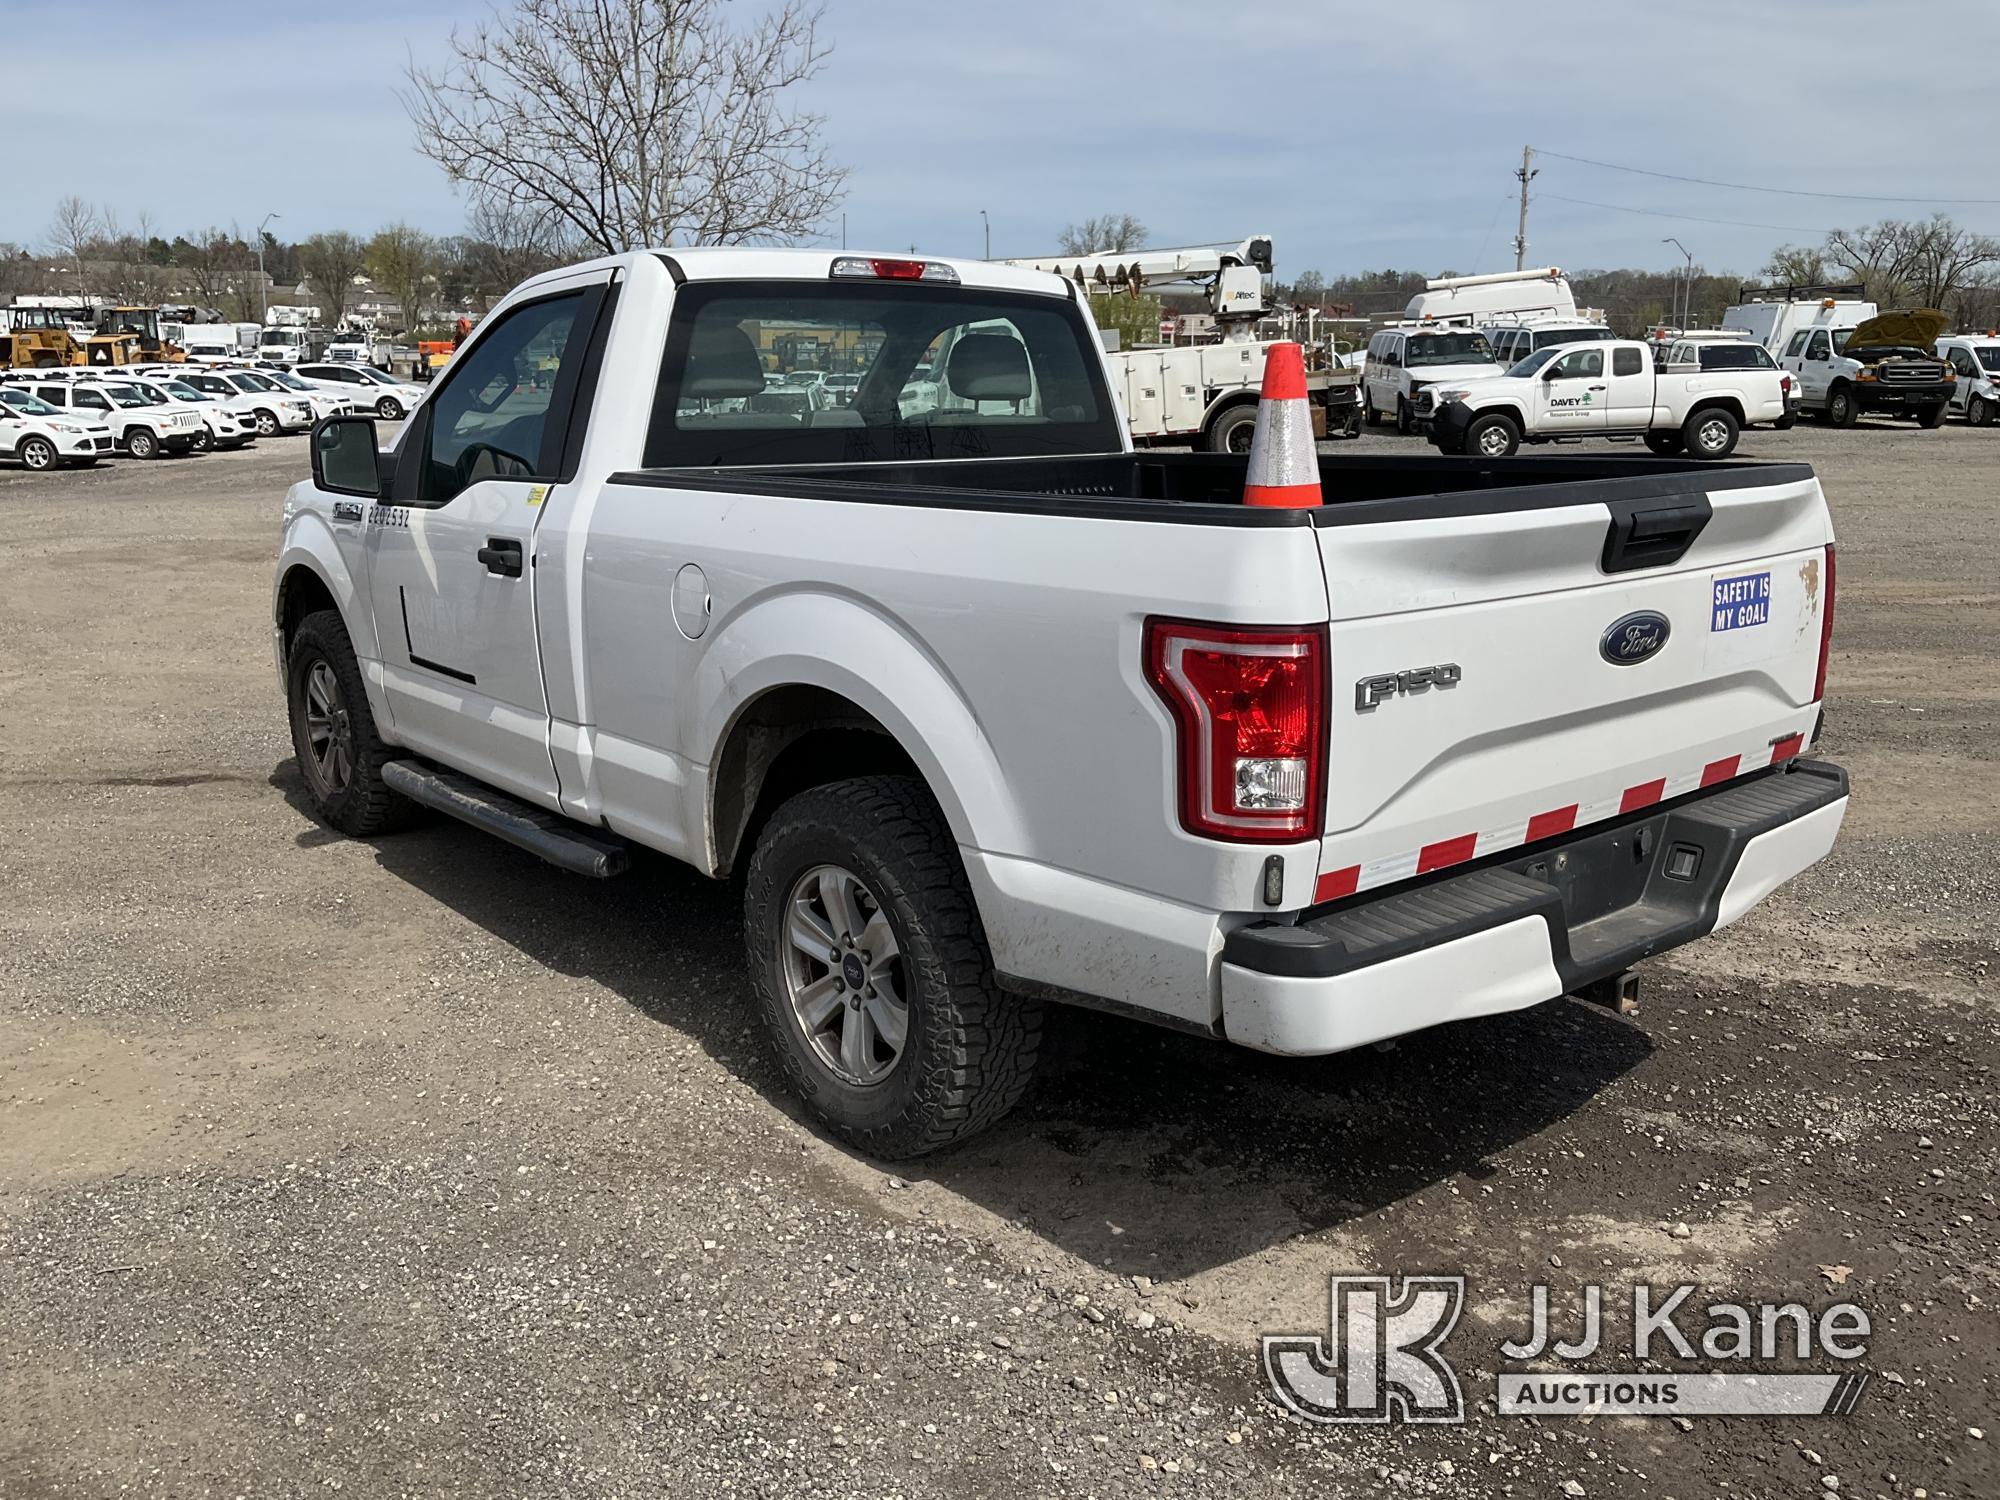 (Plymouth Meeting, PA) 2016 Ford F150 4x4 Pickup Truck Runs & Moves, Check Engine Light On, Body & R